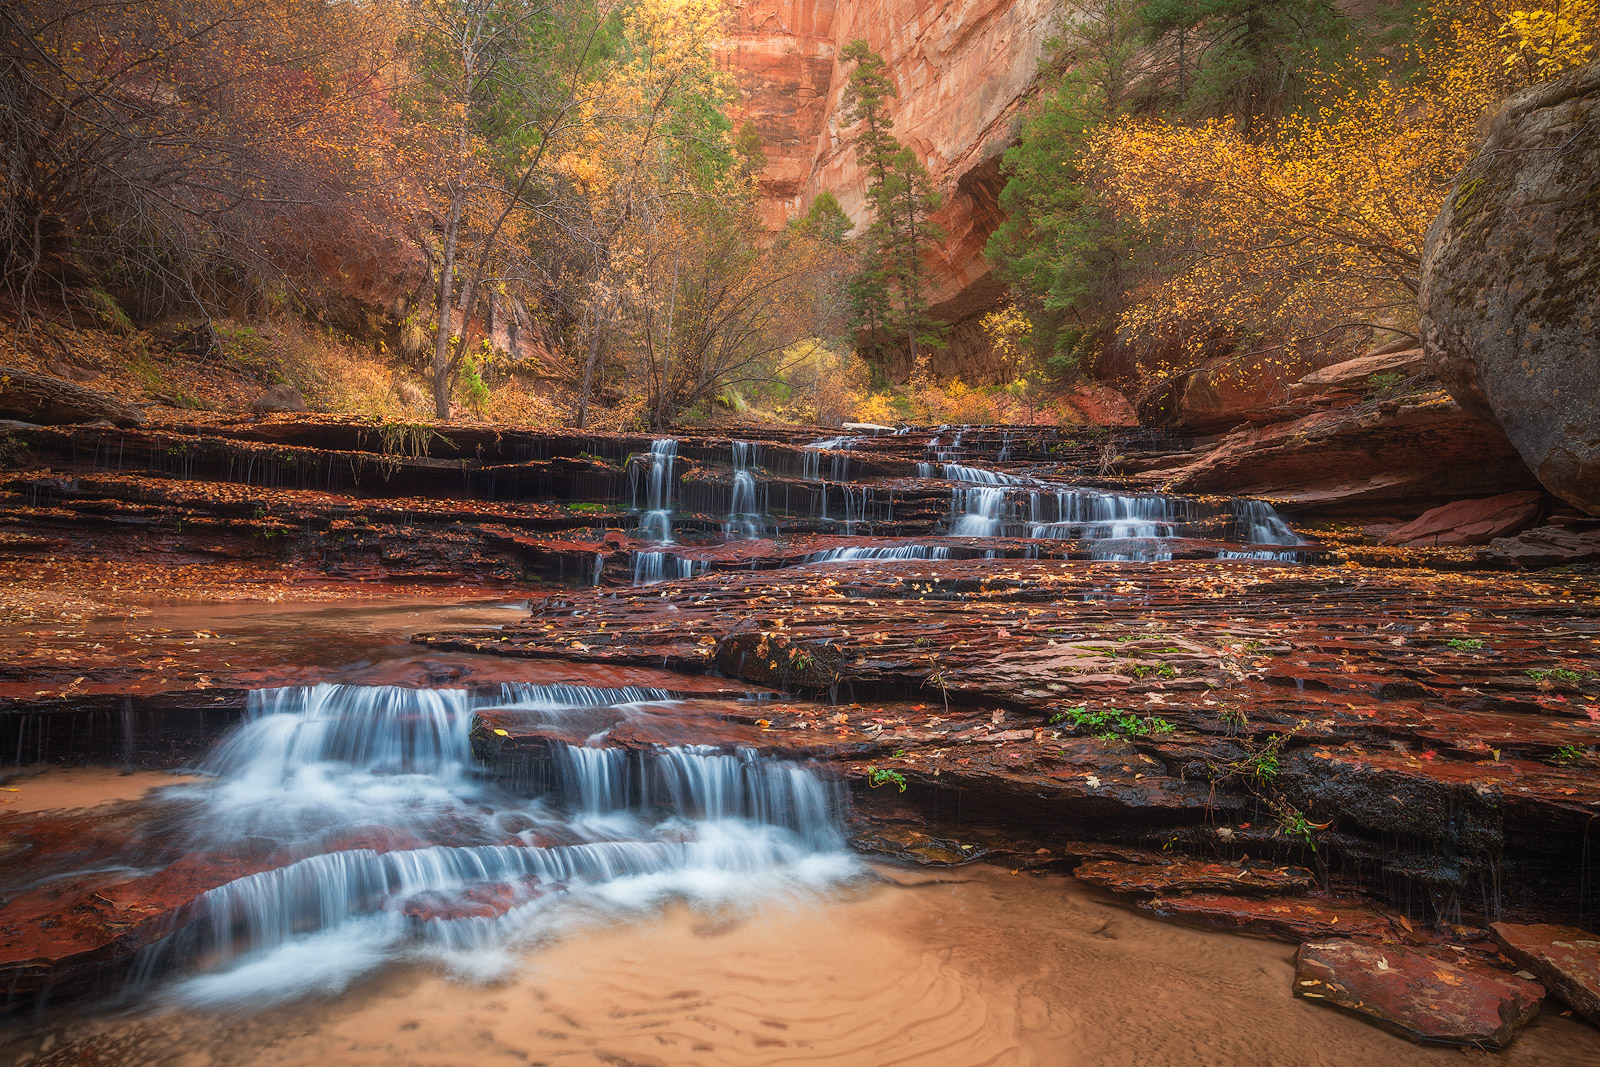 Beautiful Fall foliage atop a waterfall located deep inside a valley.